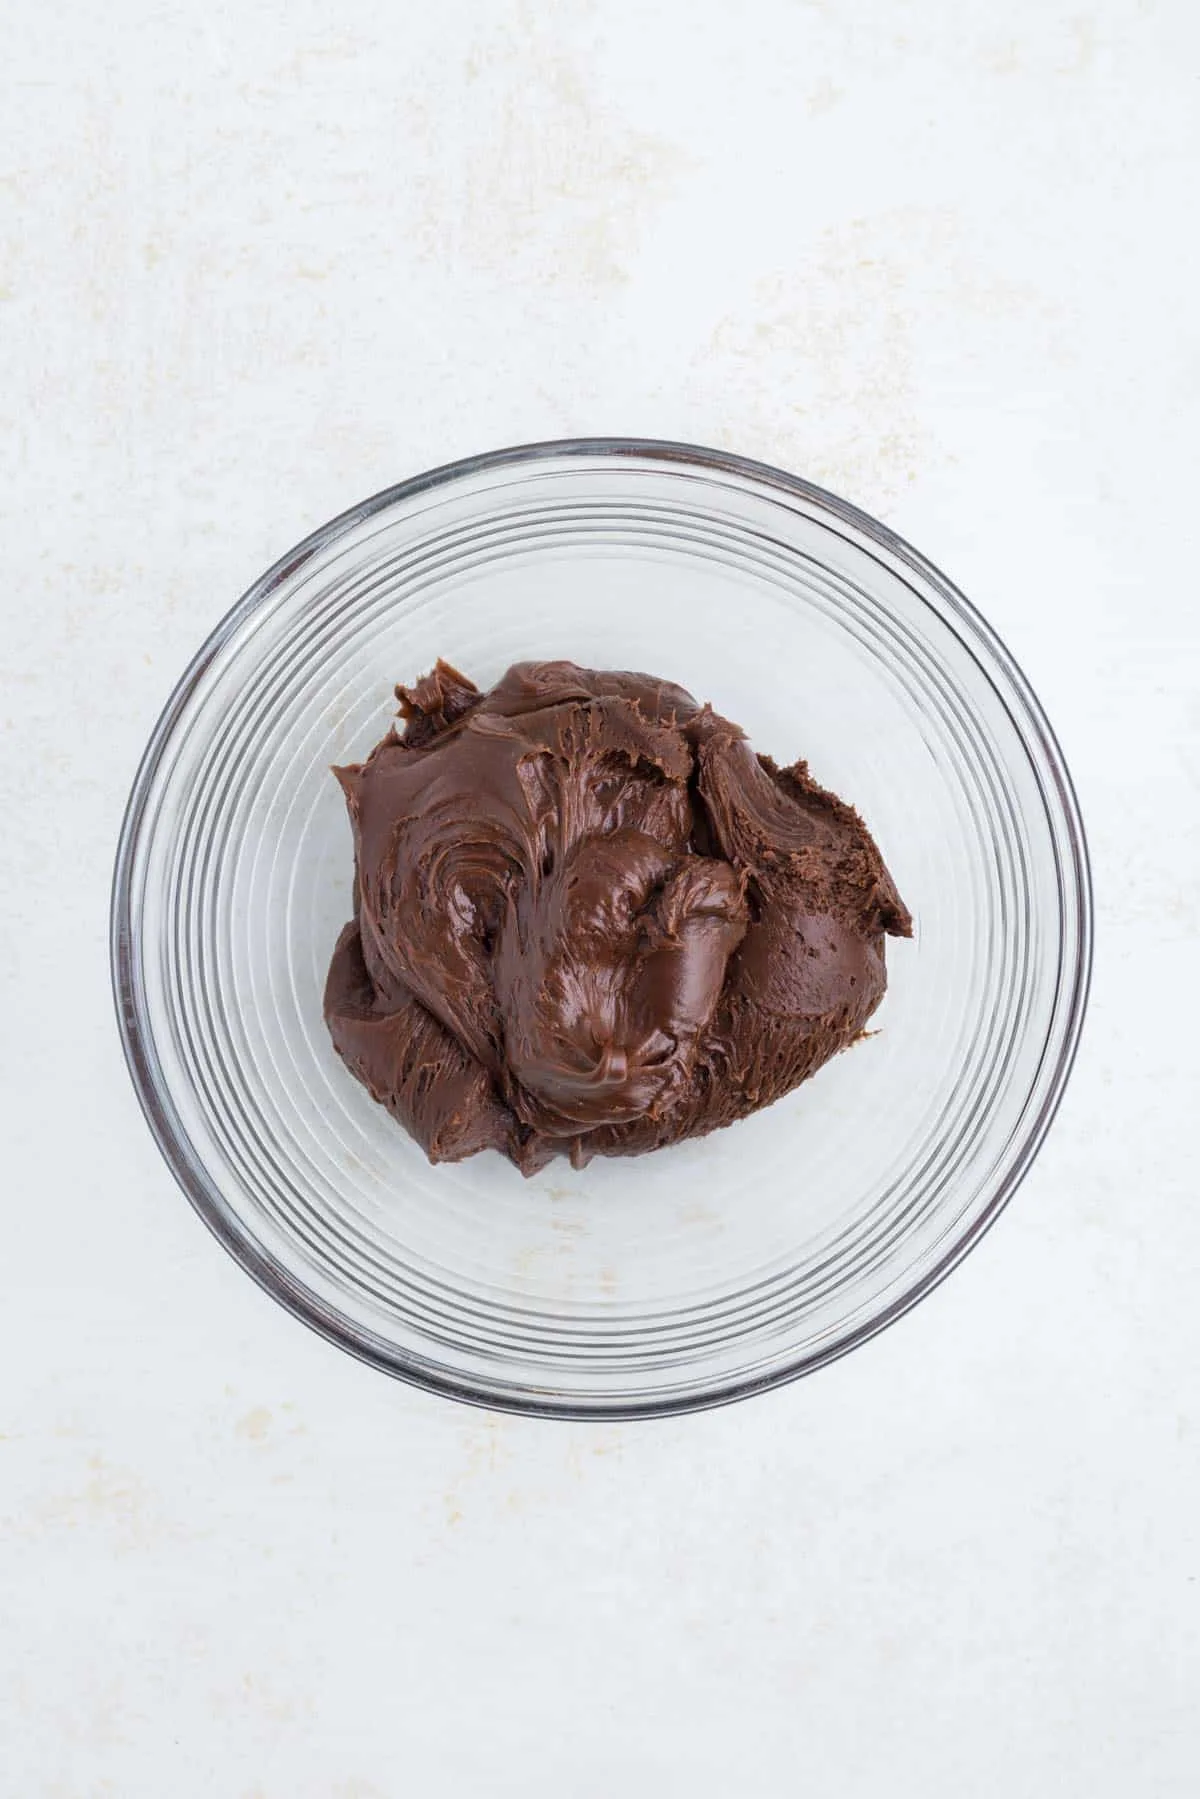 store bought chocolate frosting in a bowl